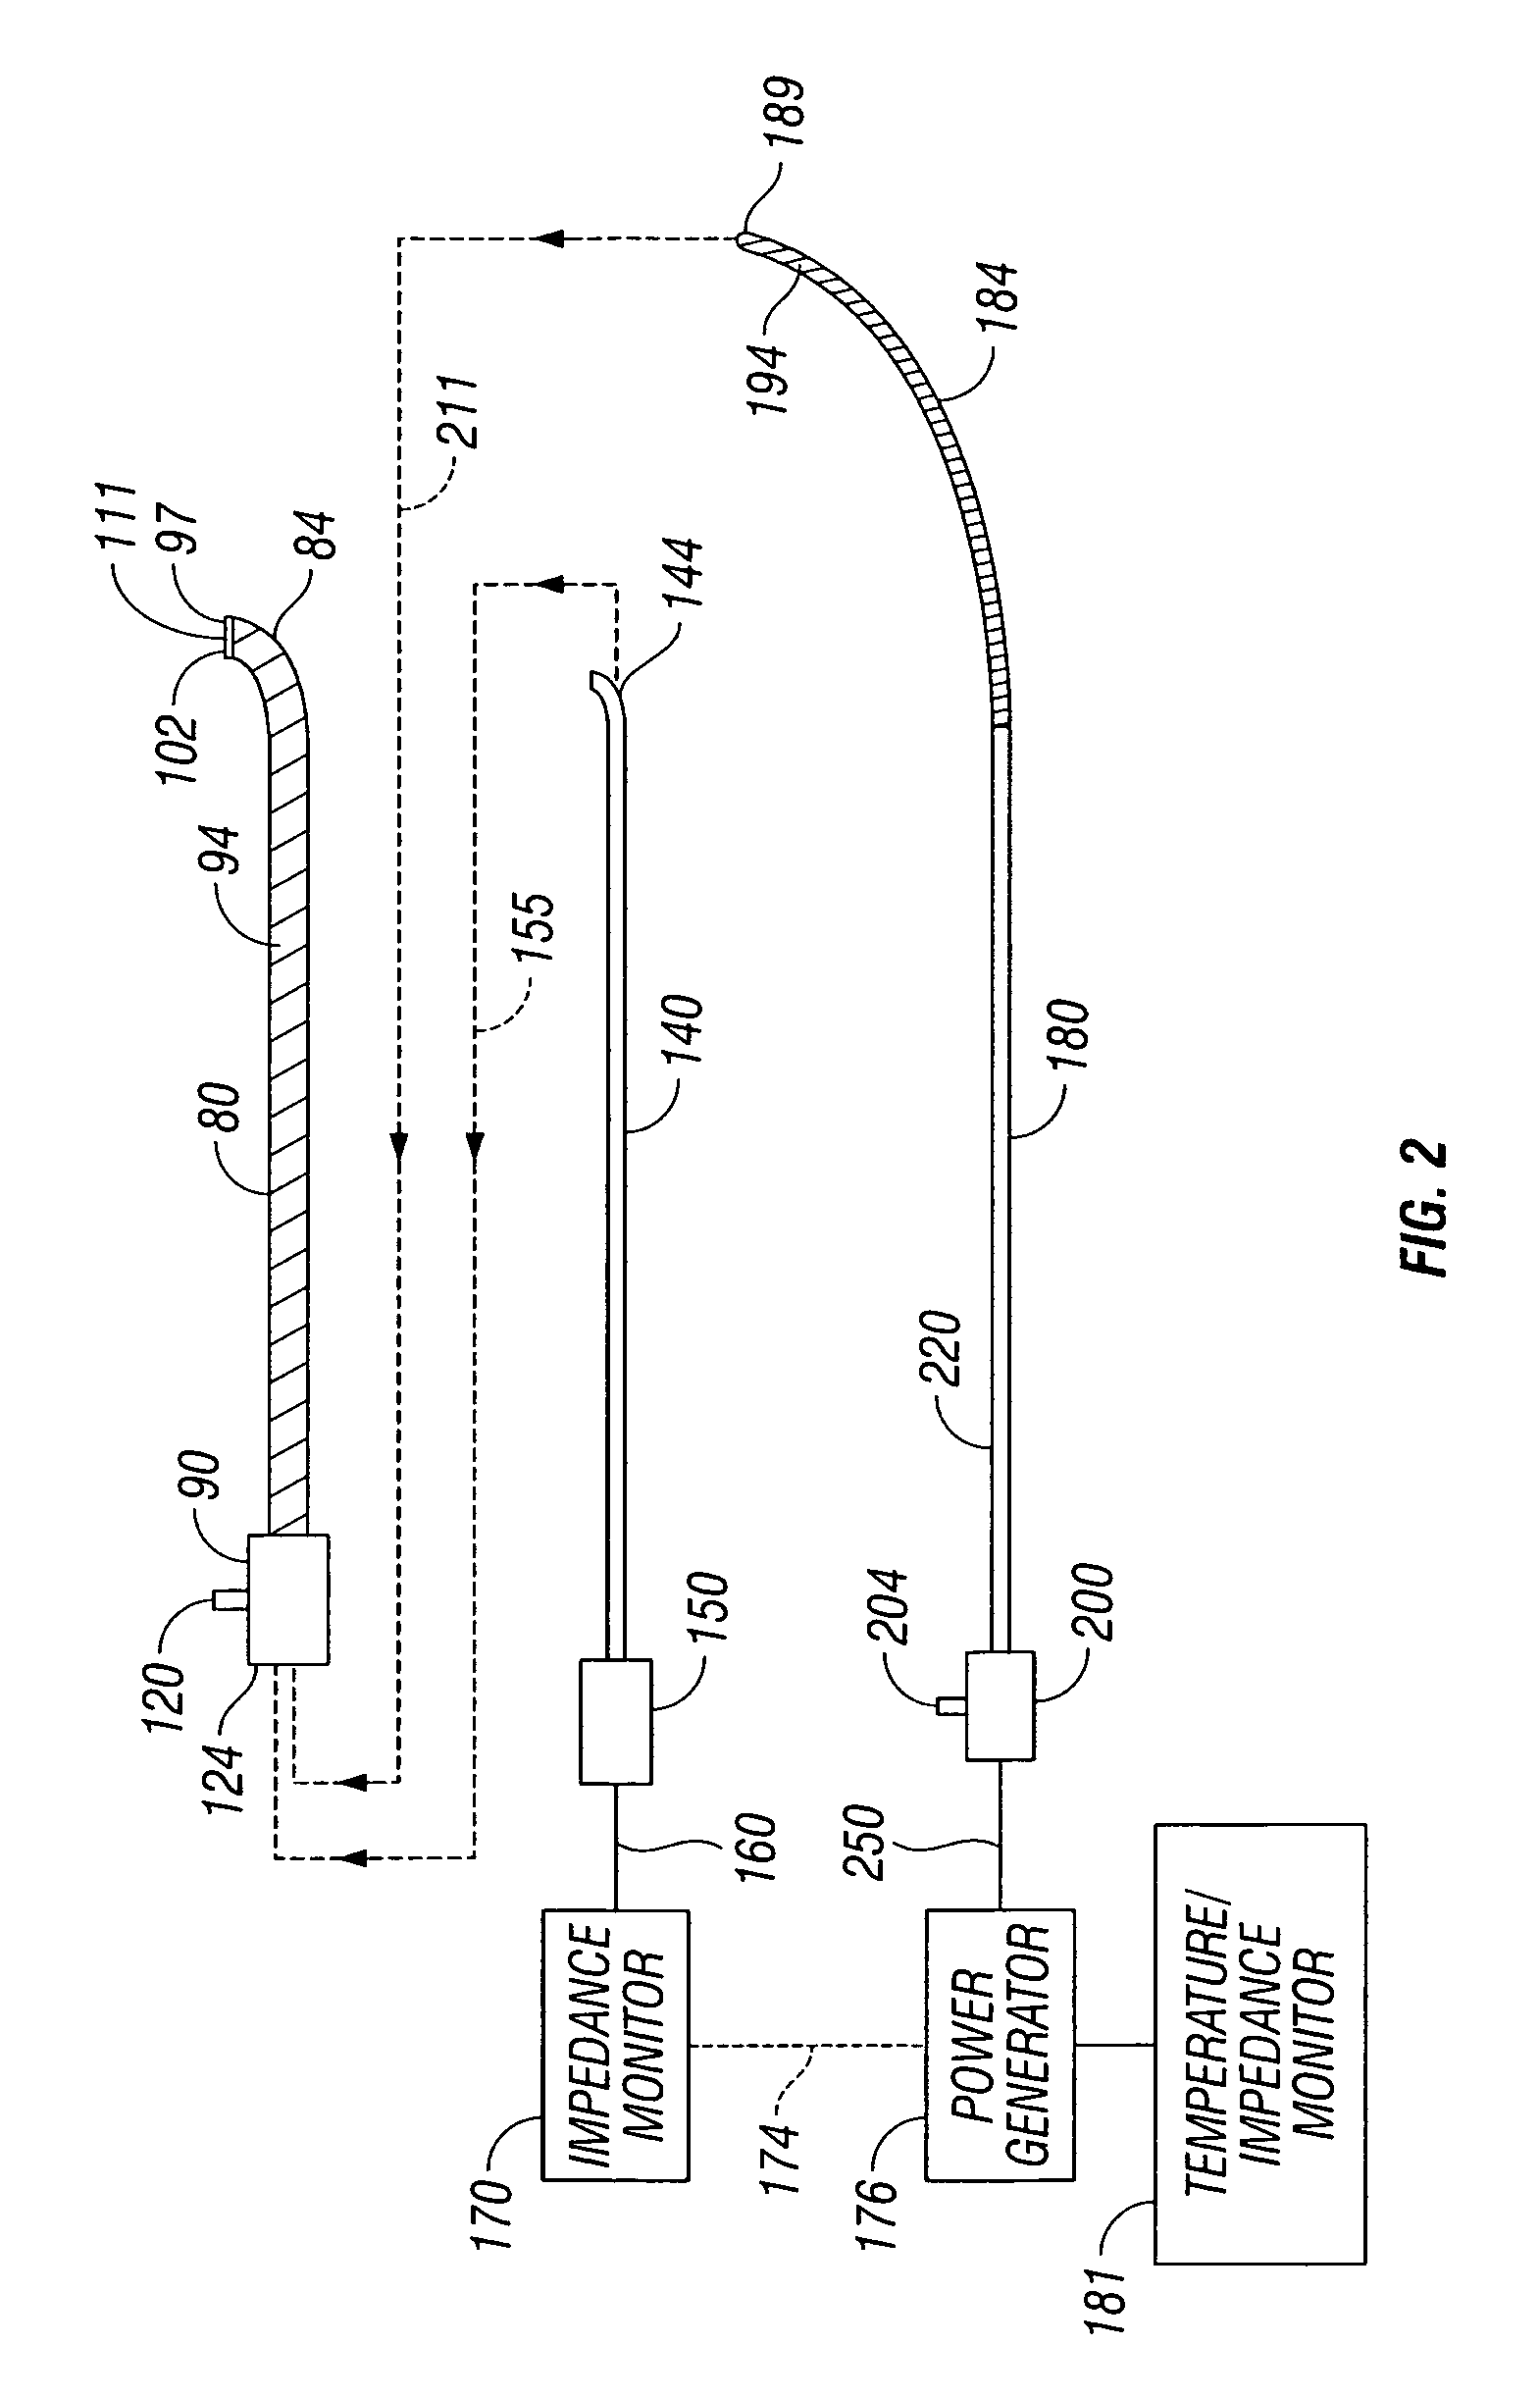 Apparatus for thermal treatment of an intervertebral disc